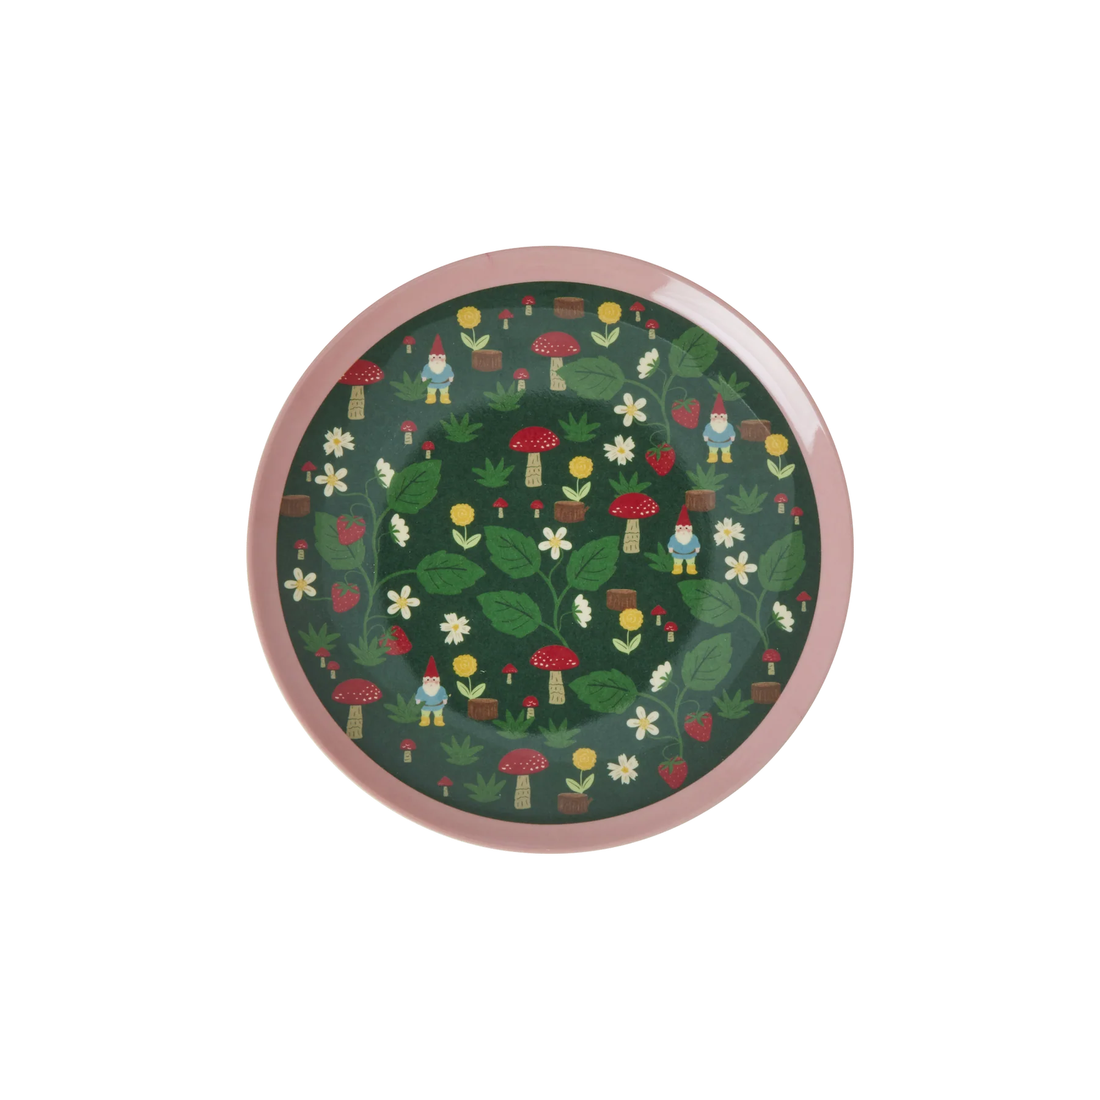 rice-dk-melamine-dessert-plate-with-forest-gnome-print-kitchen-rice-xmecp-forest